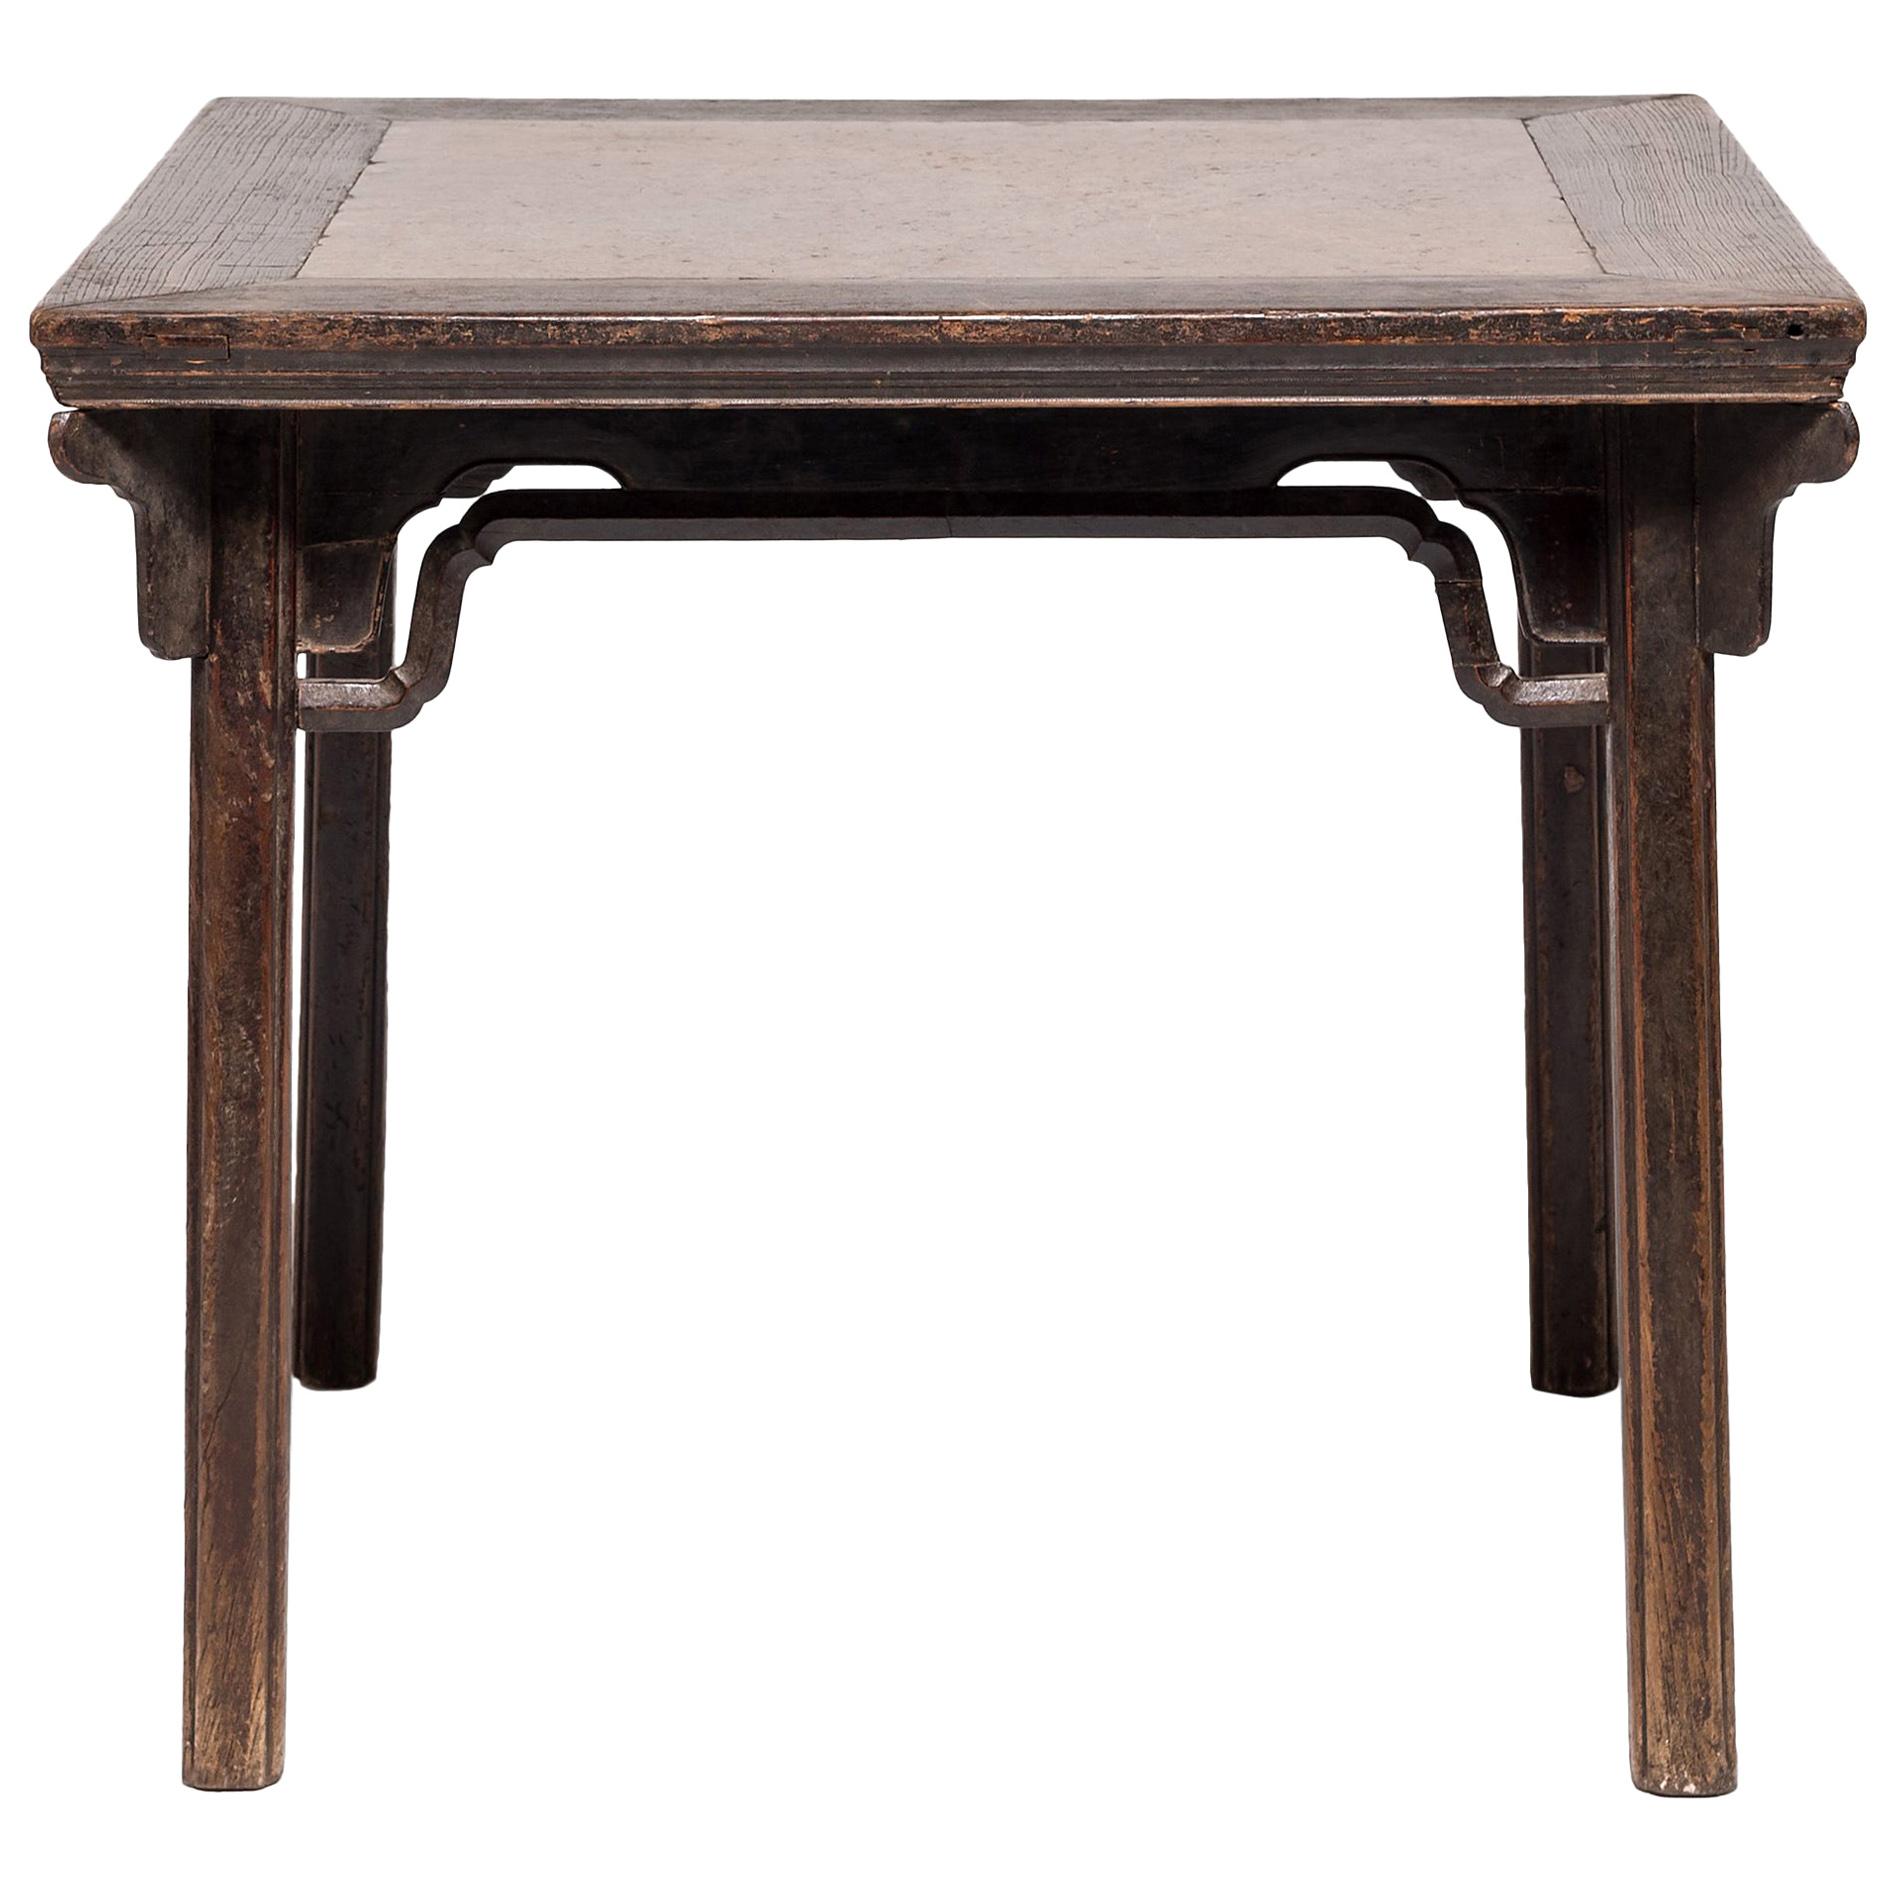 Chinese Eight Immortals Square Table with Stone Top, circa 1800